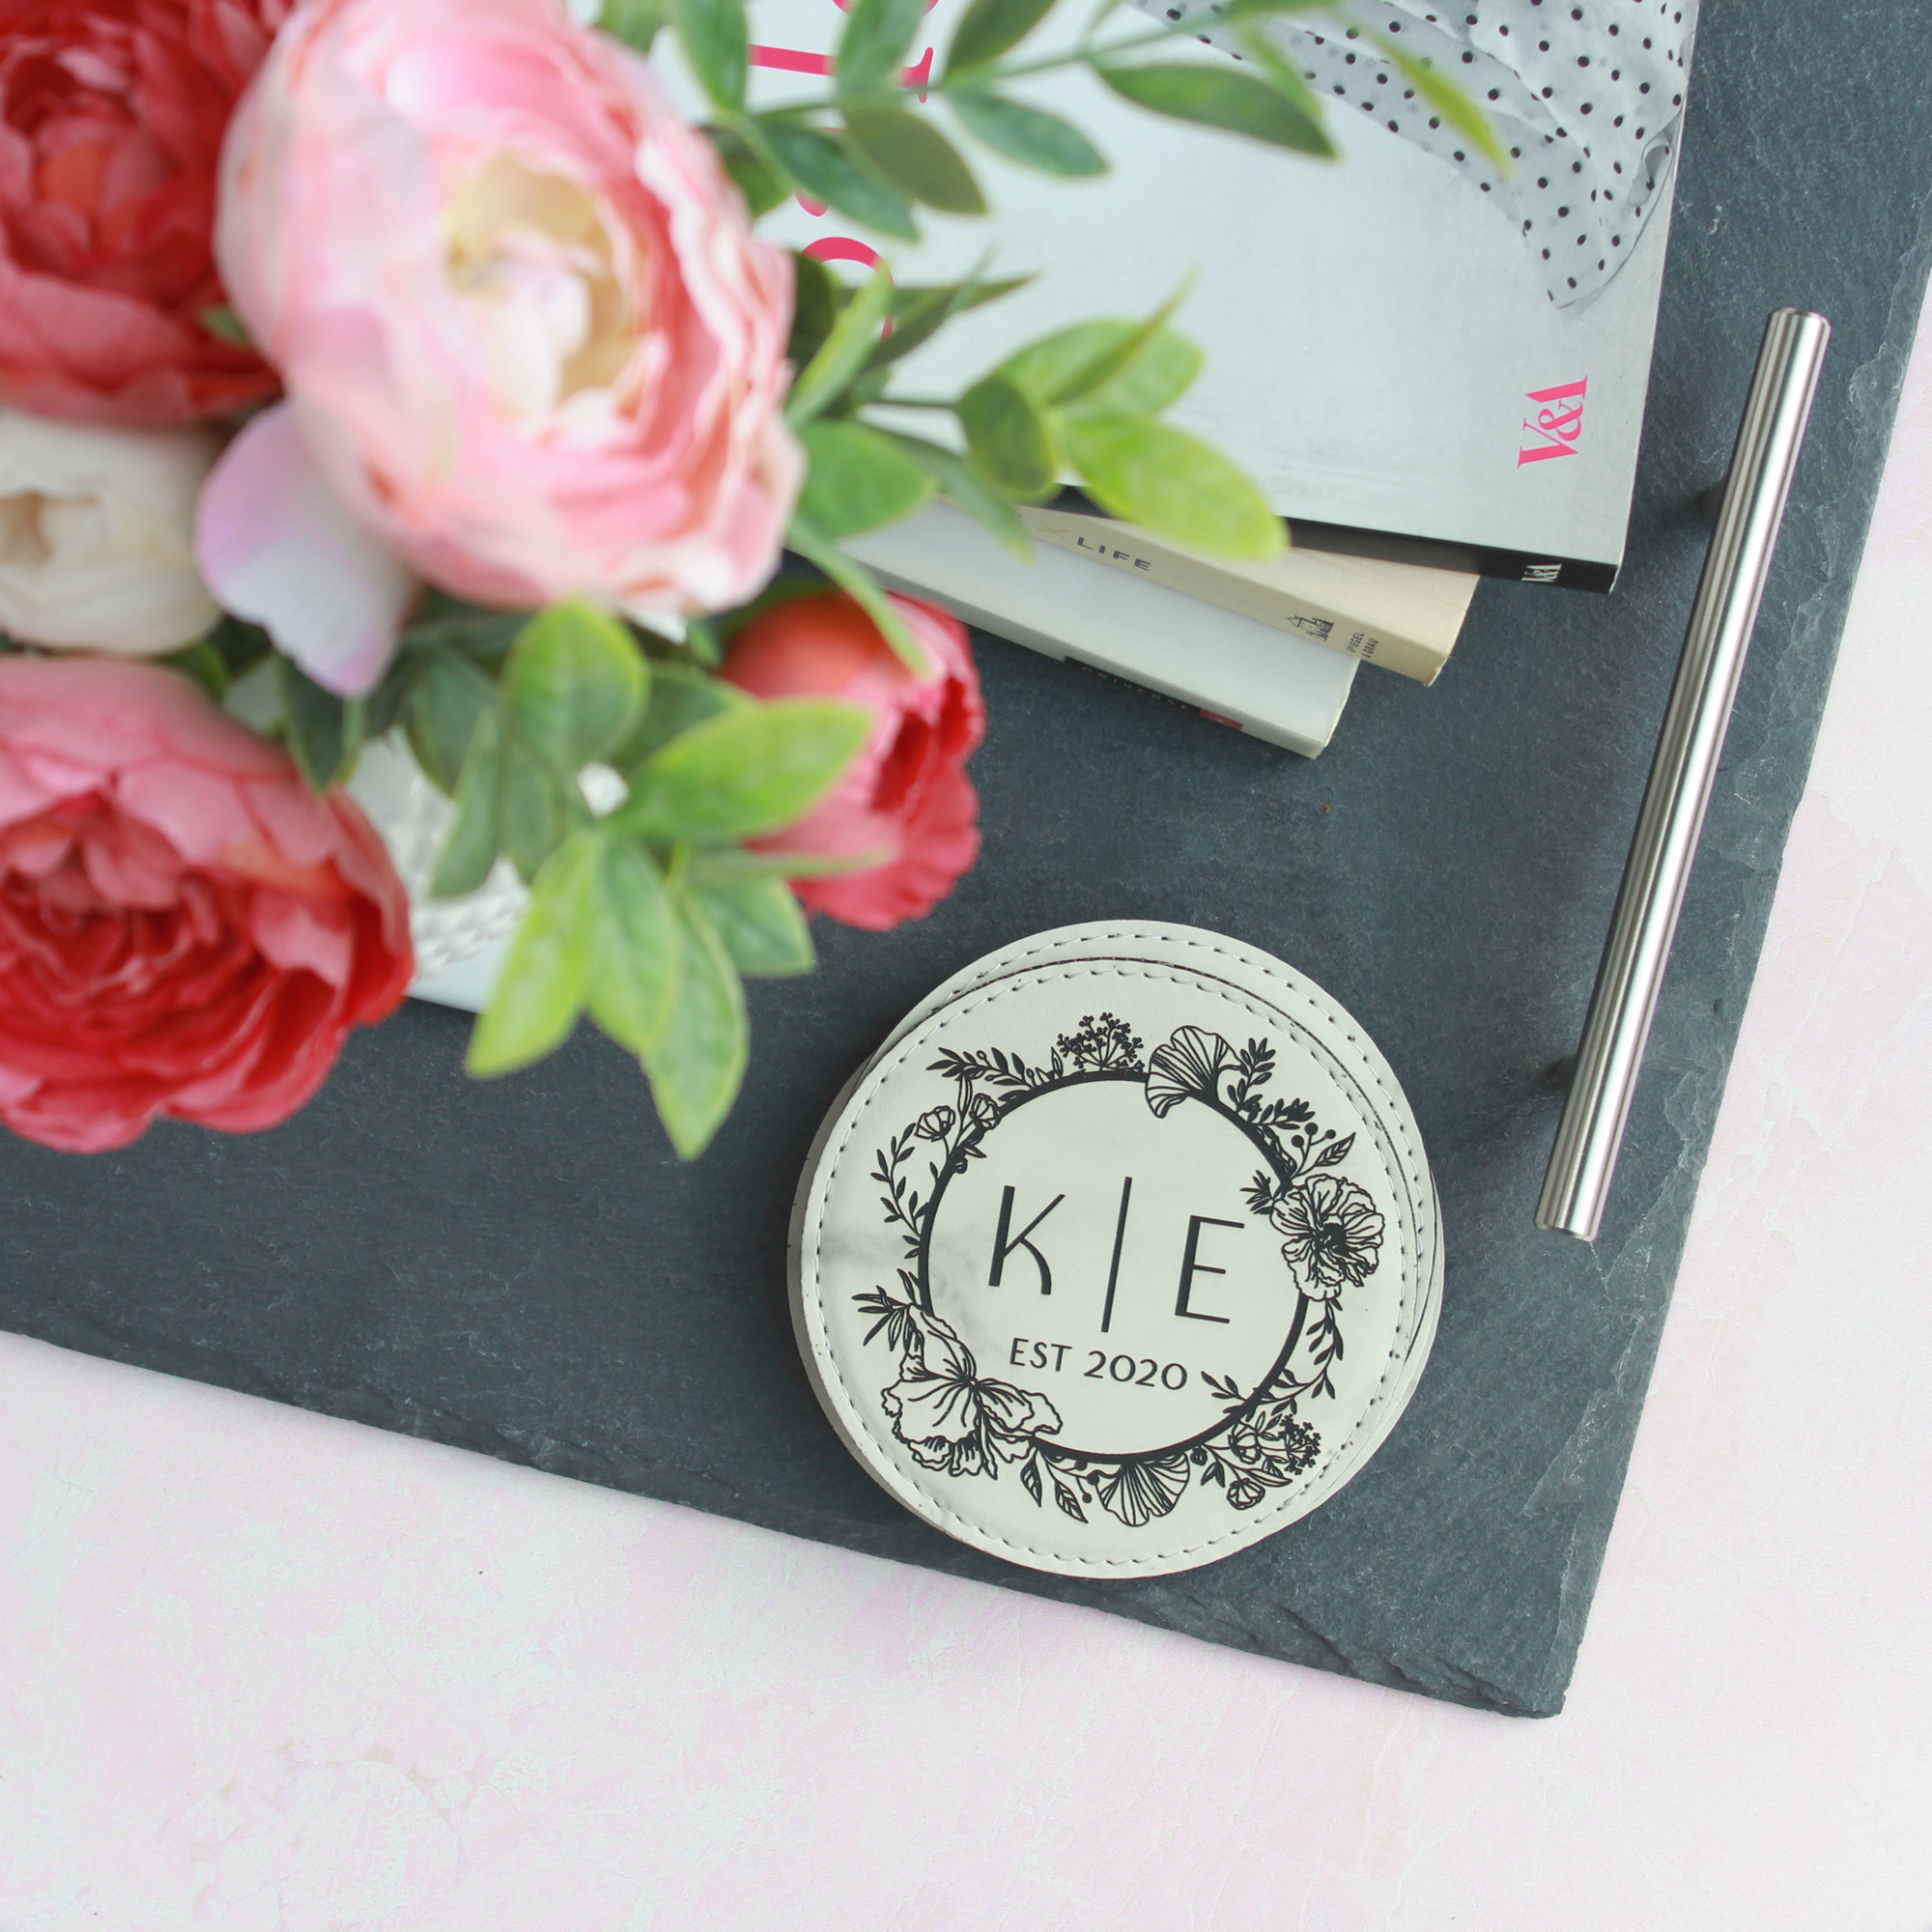 Personalized Leather Coasters - Round, Set of 4